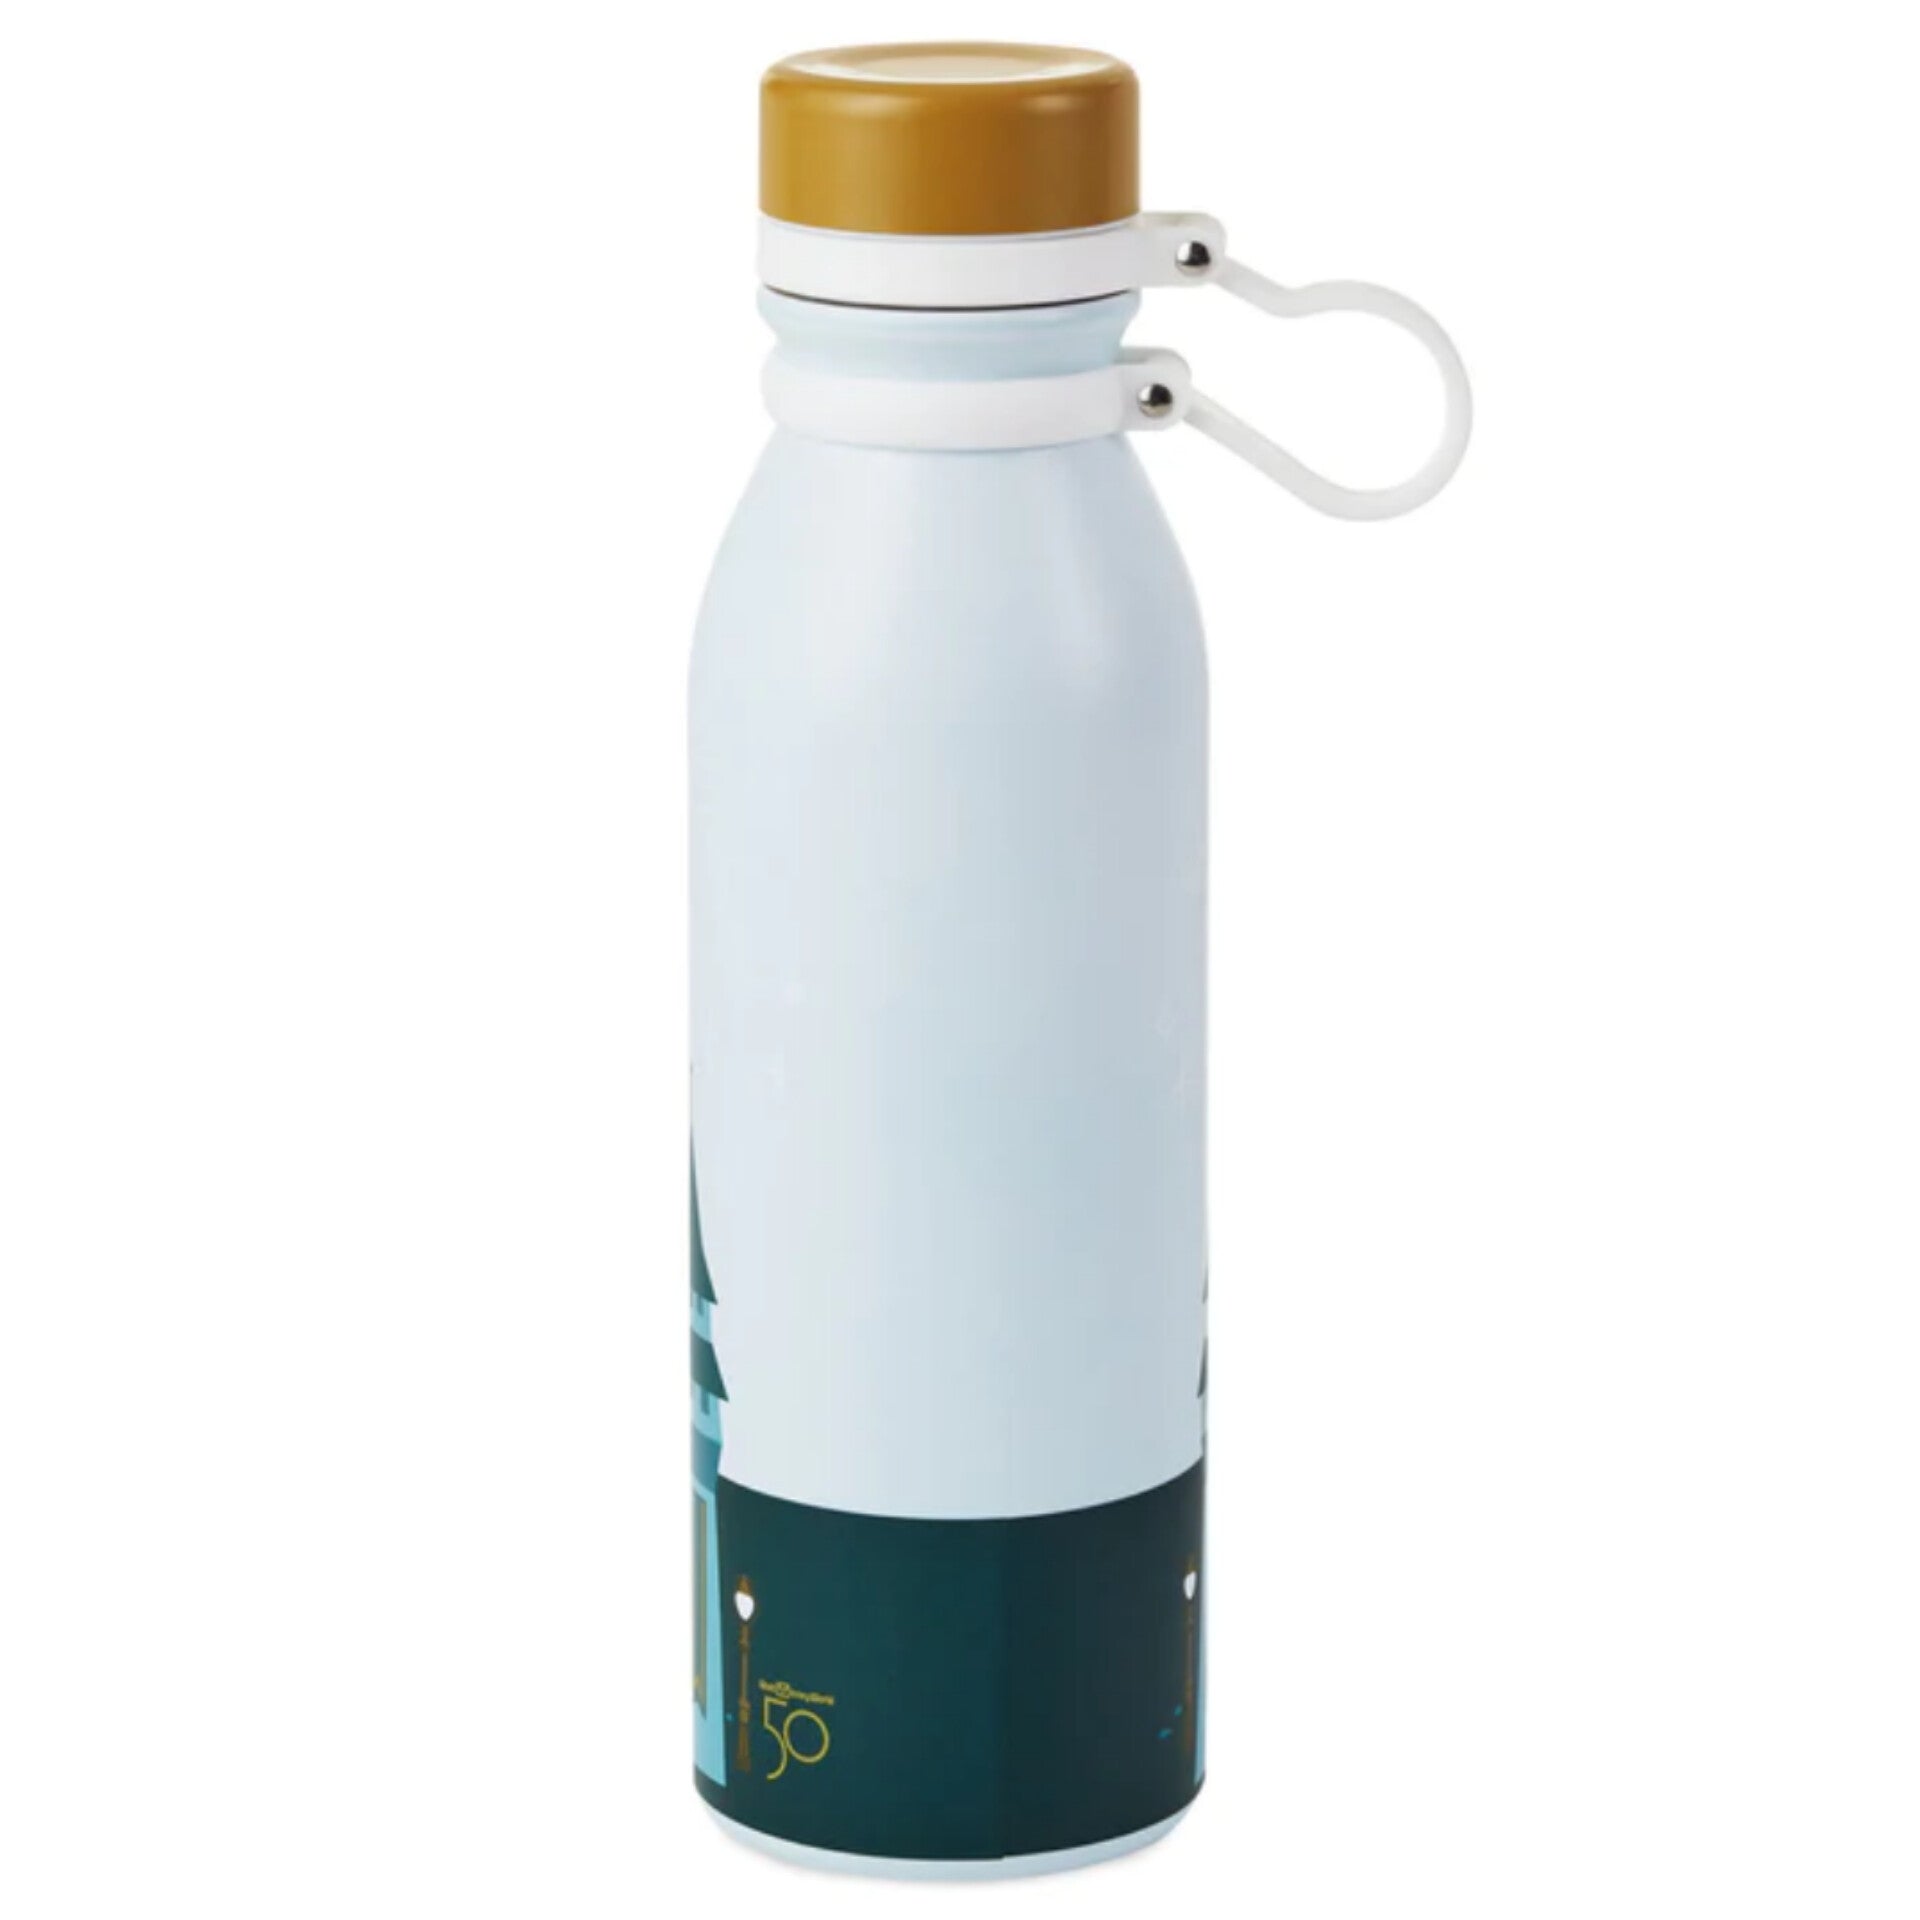 Fiftieth Anniversary Castle Fireworks Color-Changing Water Bottle